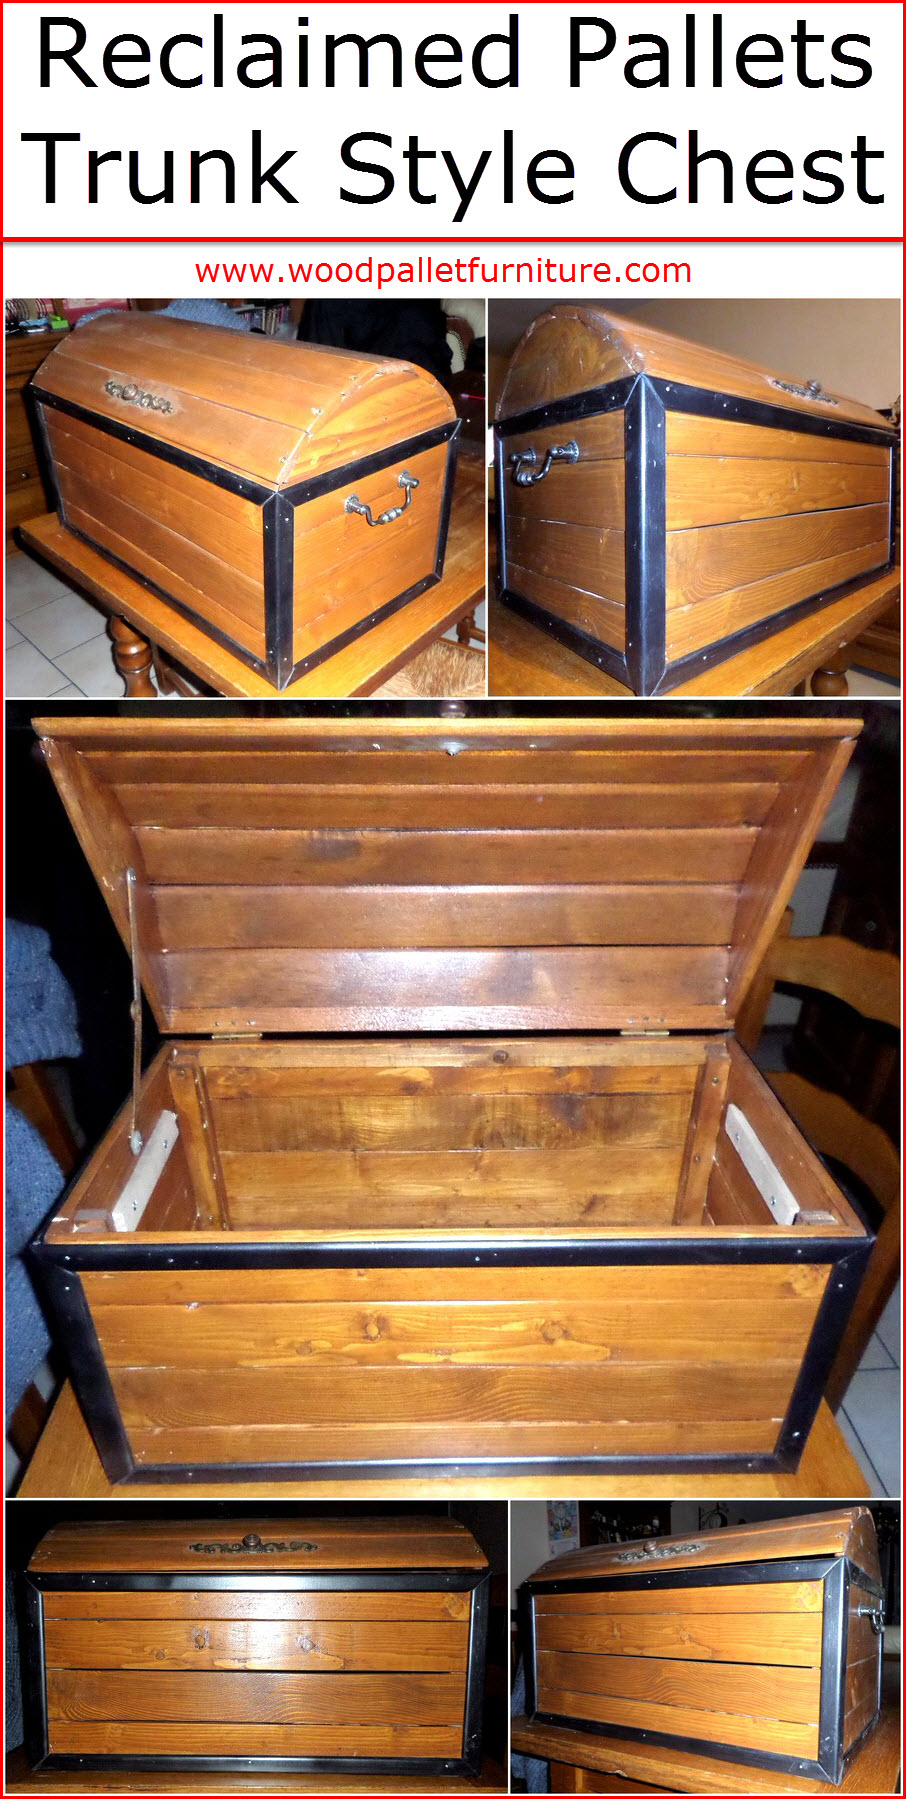 reclaimed-pallets-trunk-style-chest